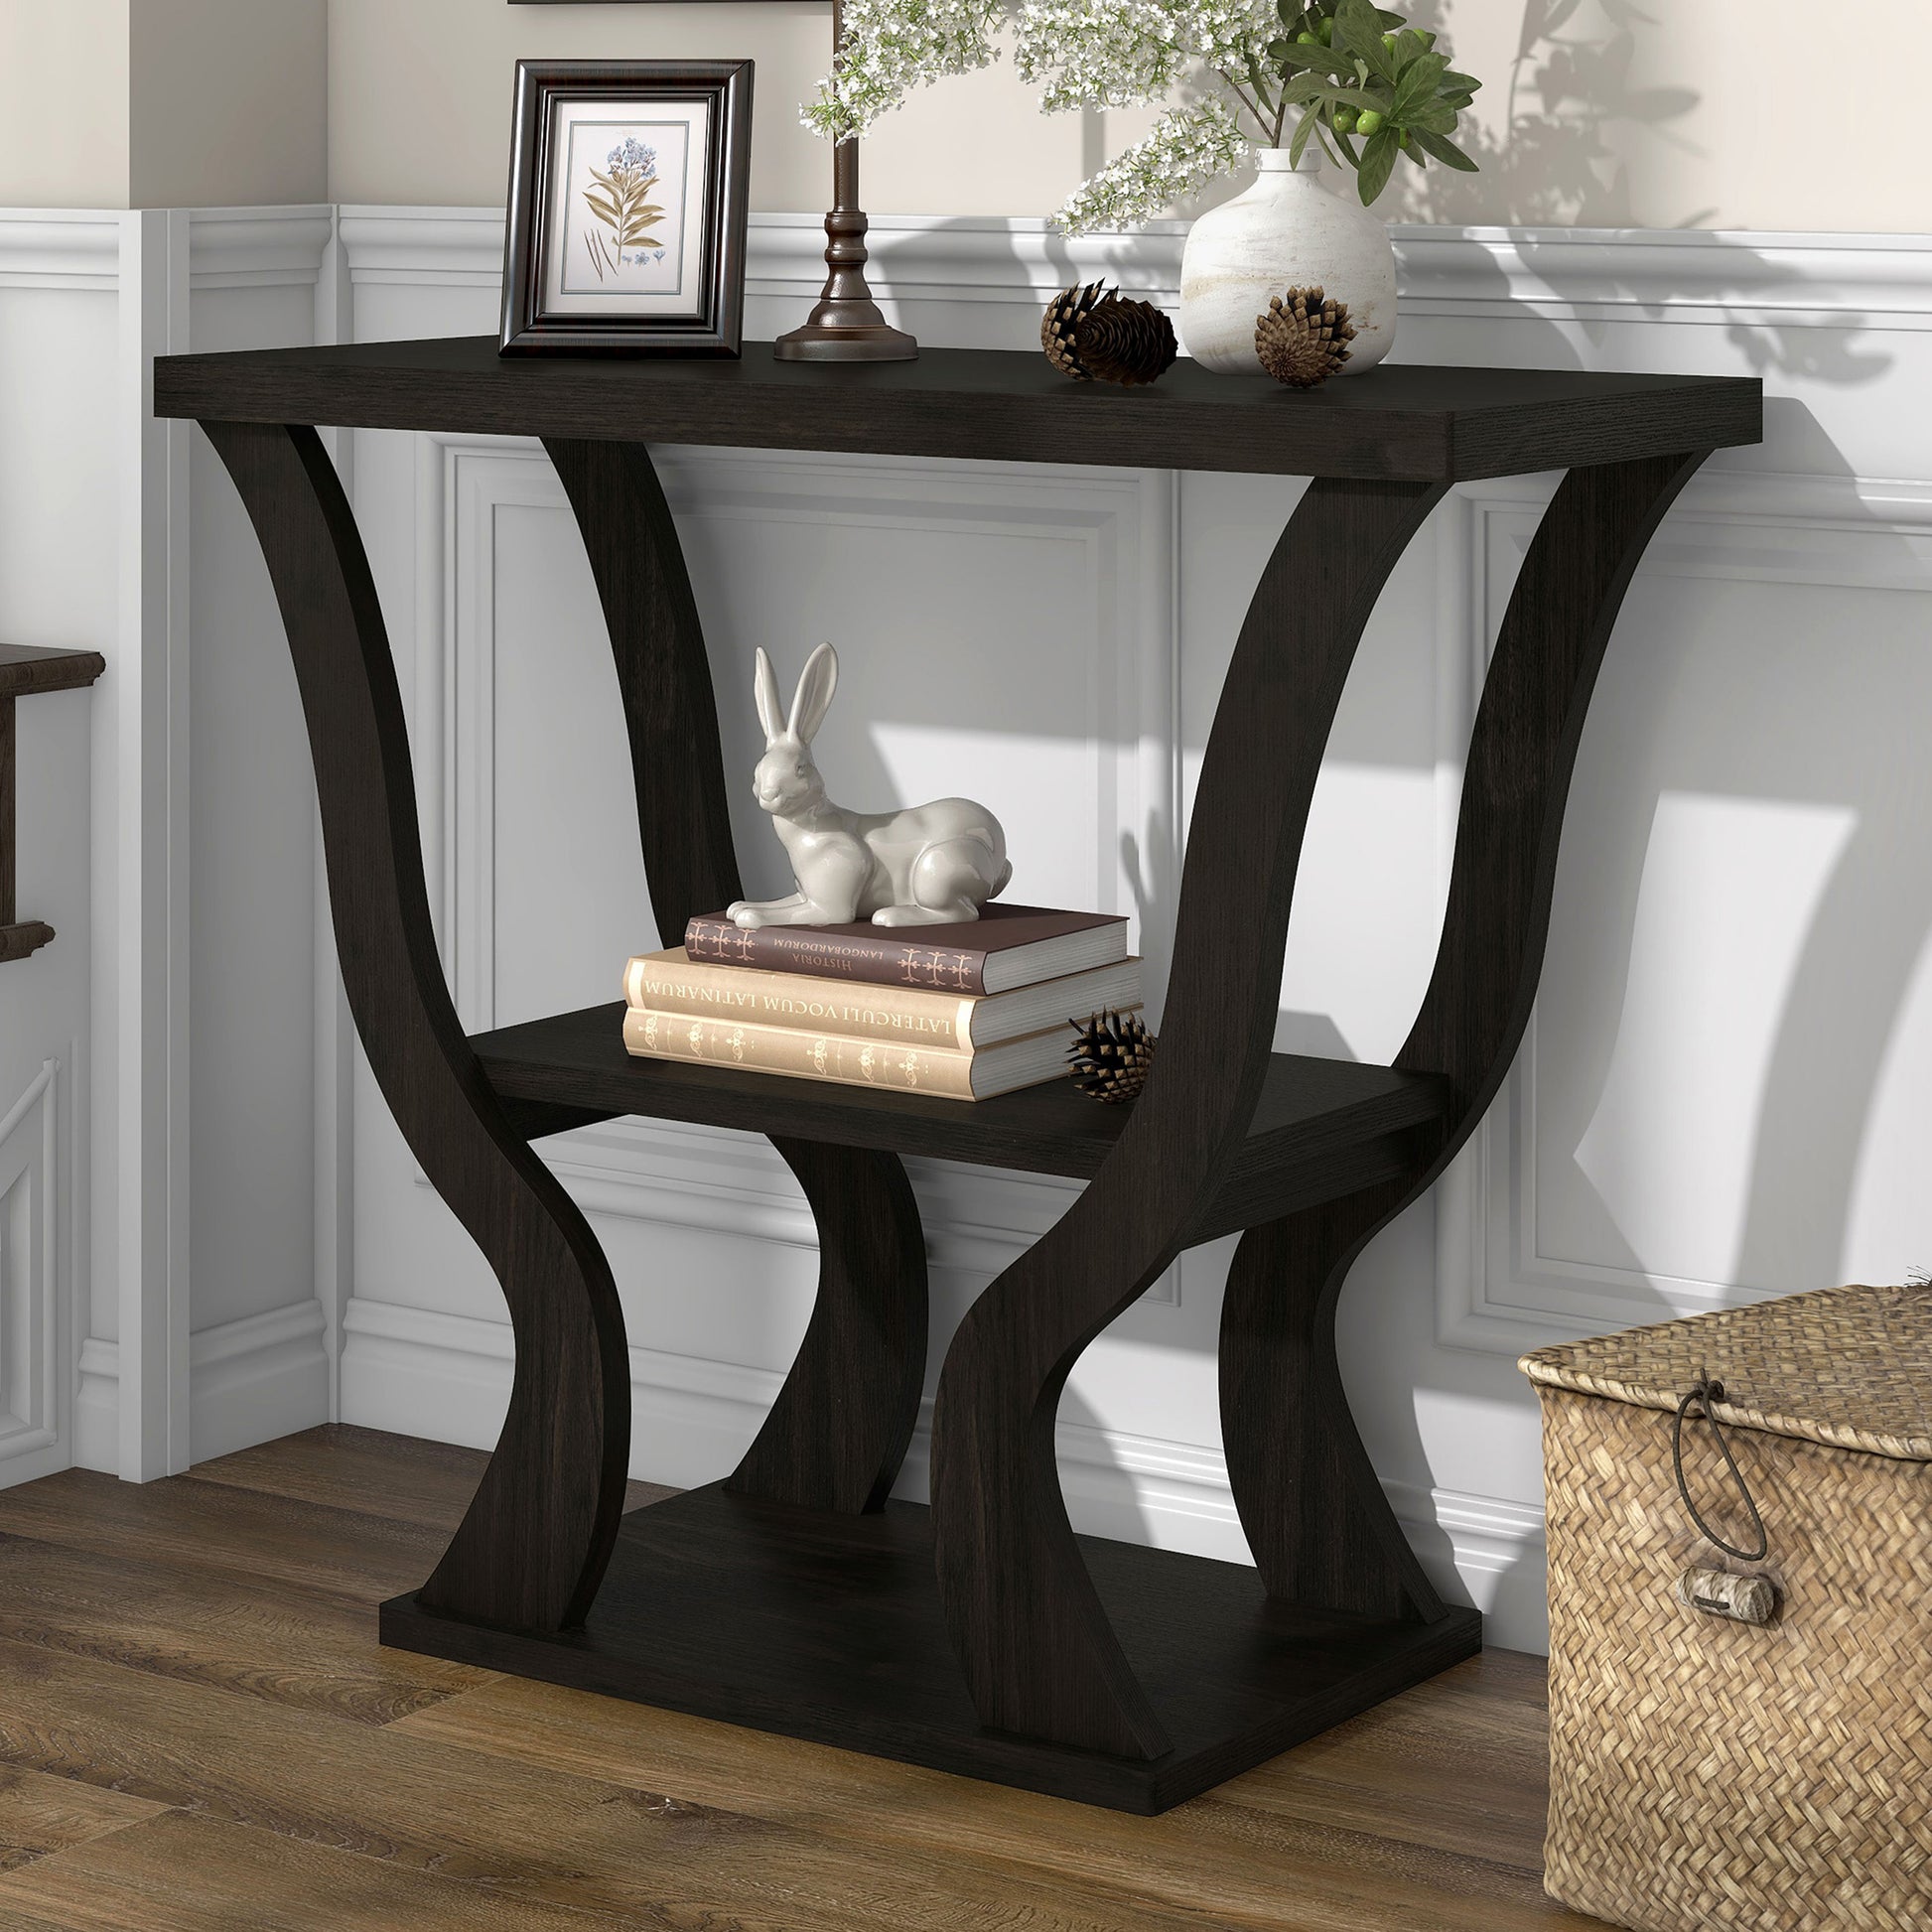 Left angled transitional espresso curvy console table in a living area with accessories